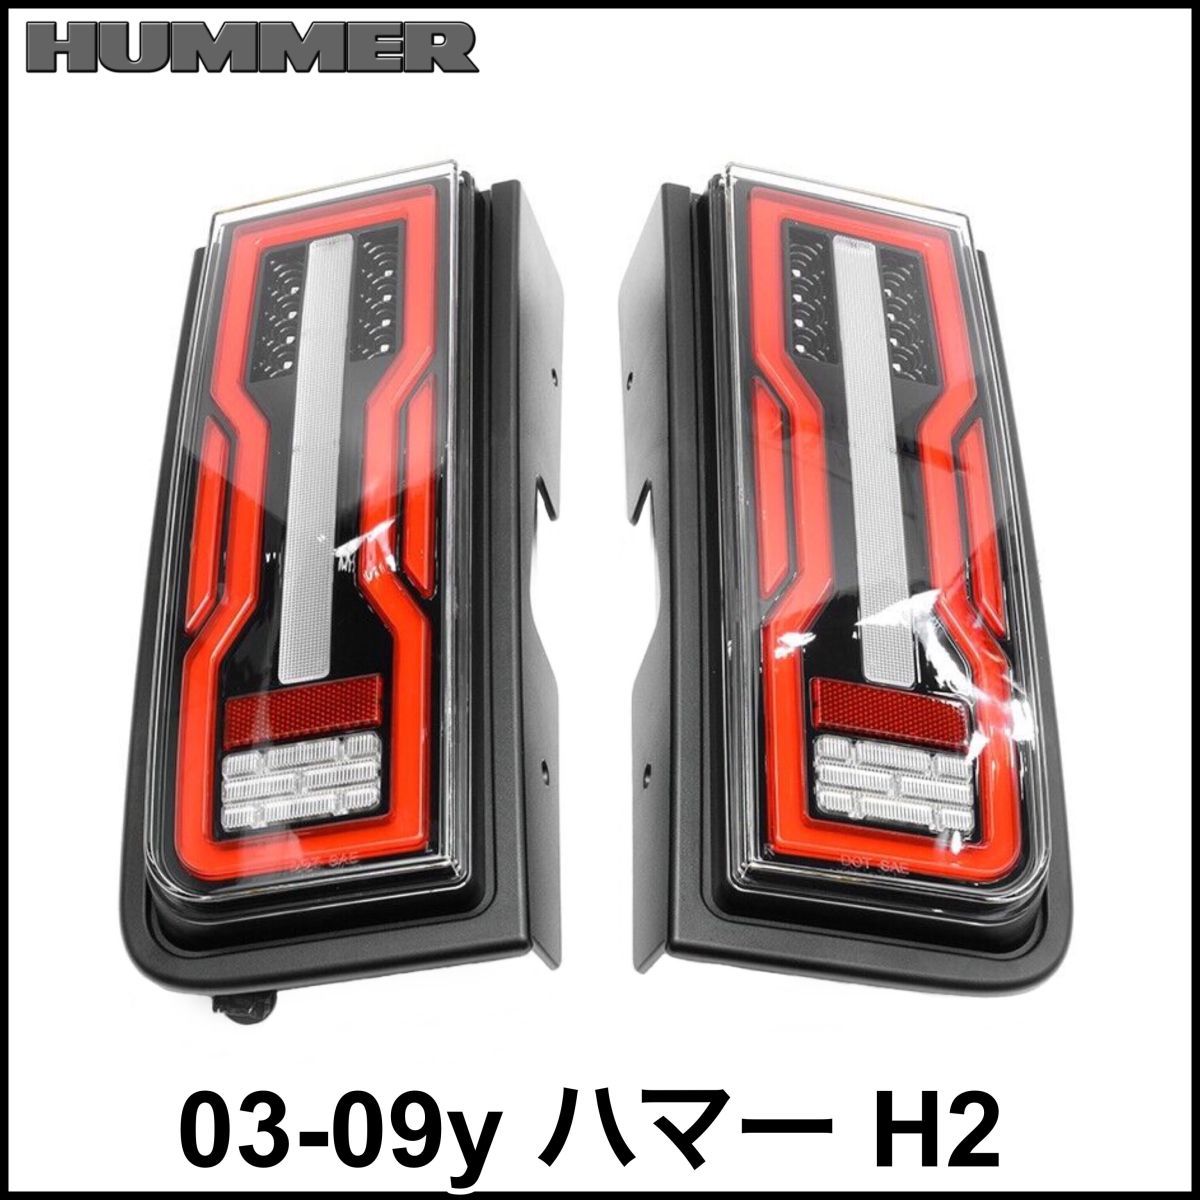  tax included after market LED tail light tail lamp tale lense rear light clear new model EV Hummer style 03-09y Hummer H2 prompt decision immediate payment stock goods 